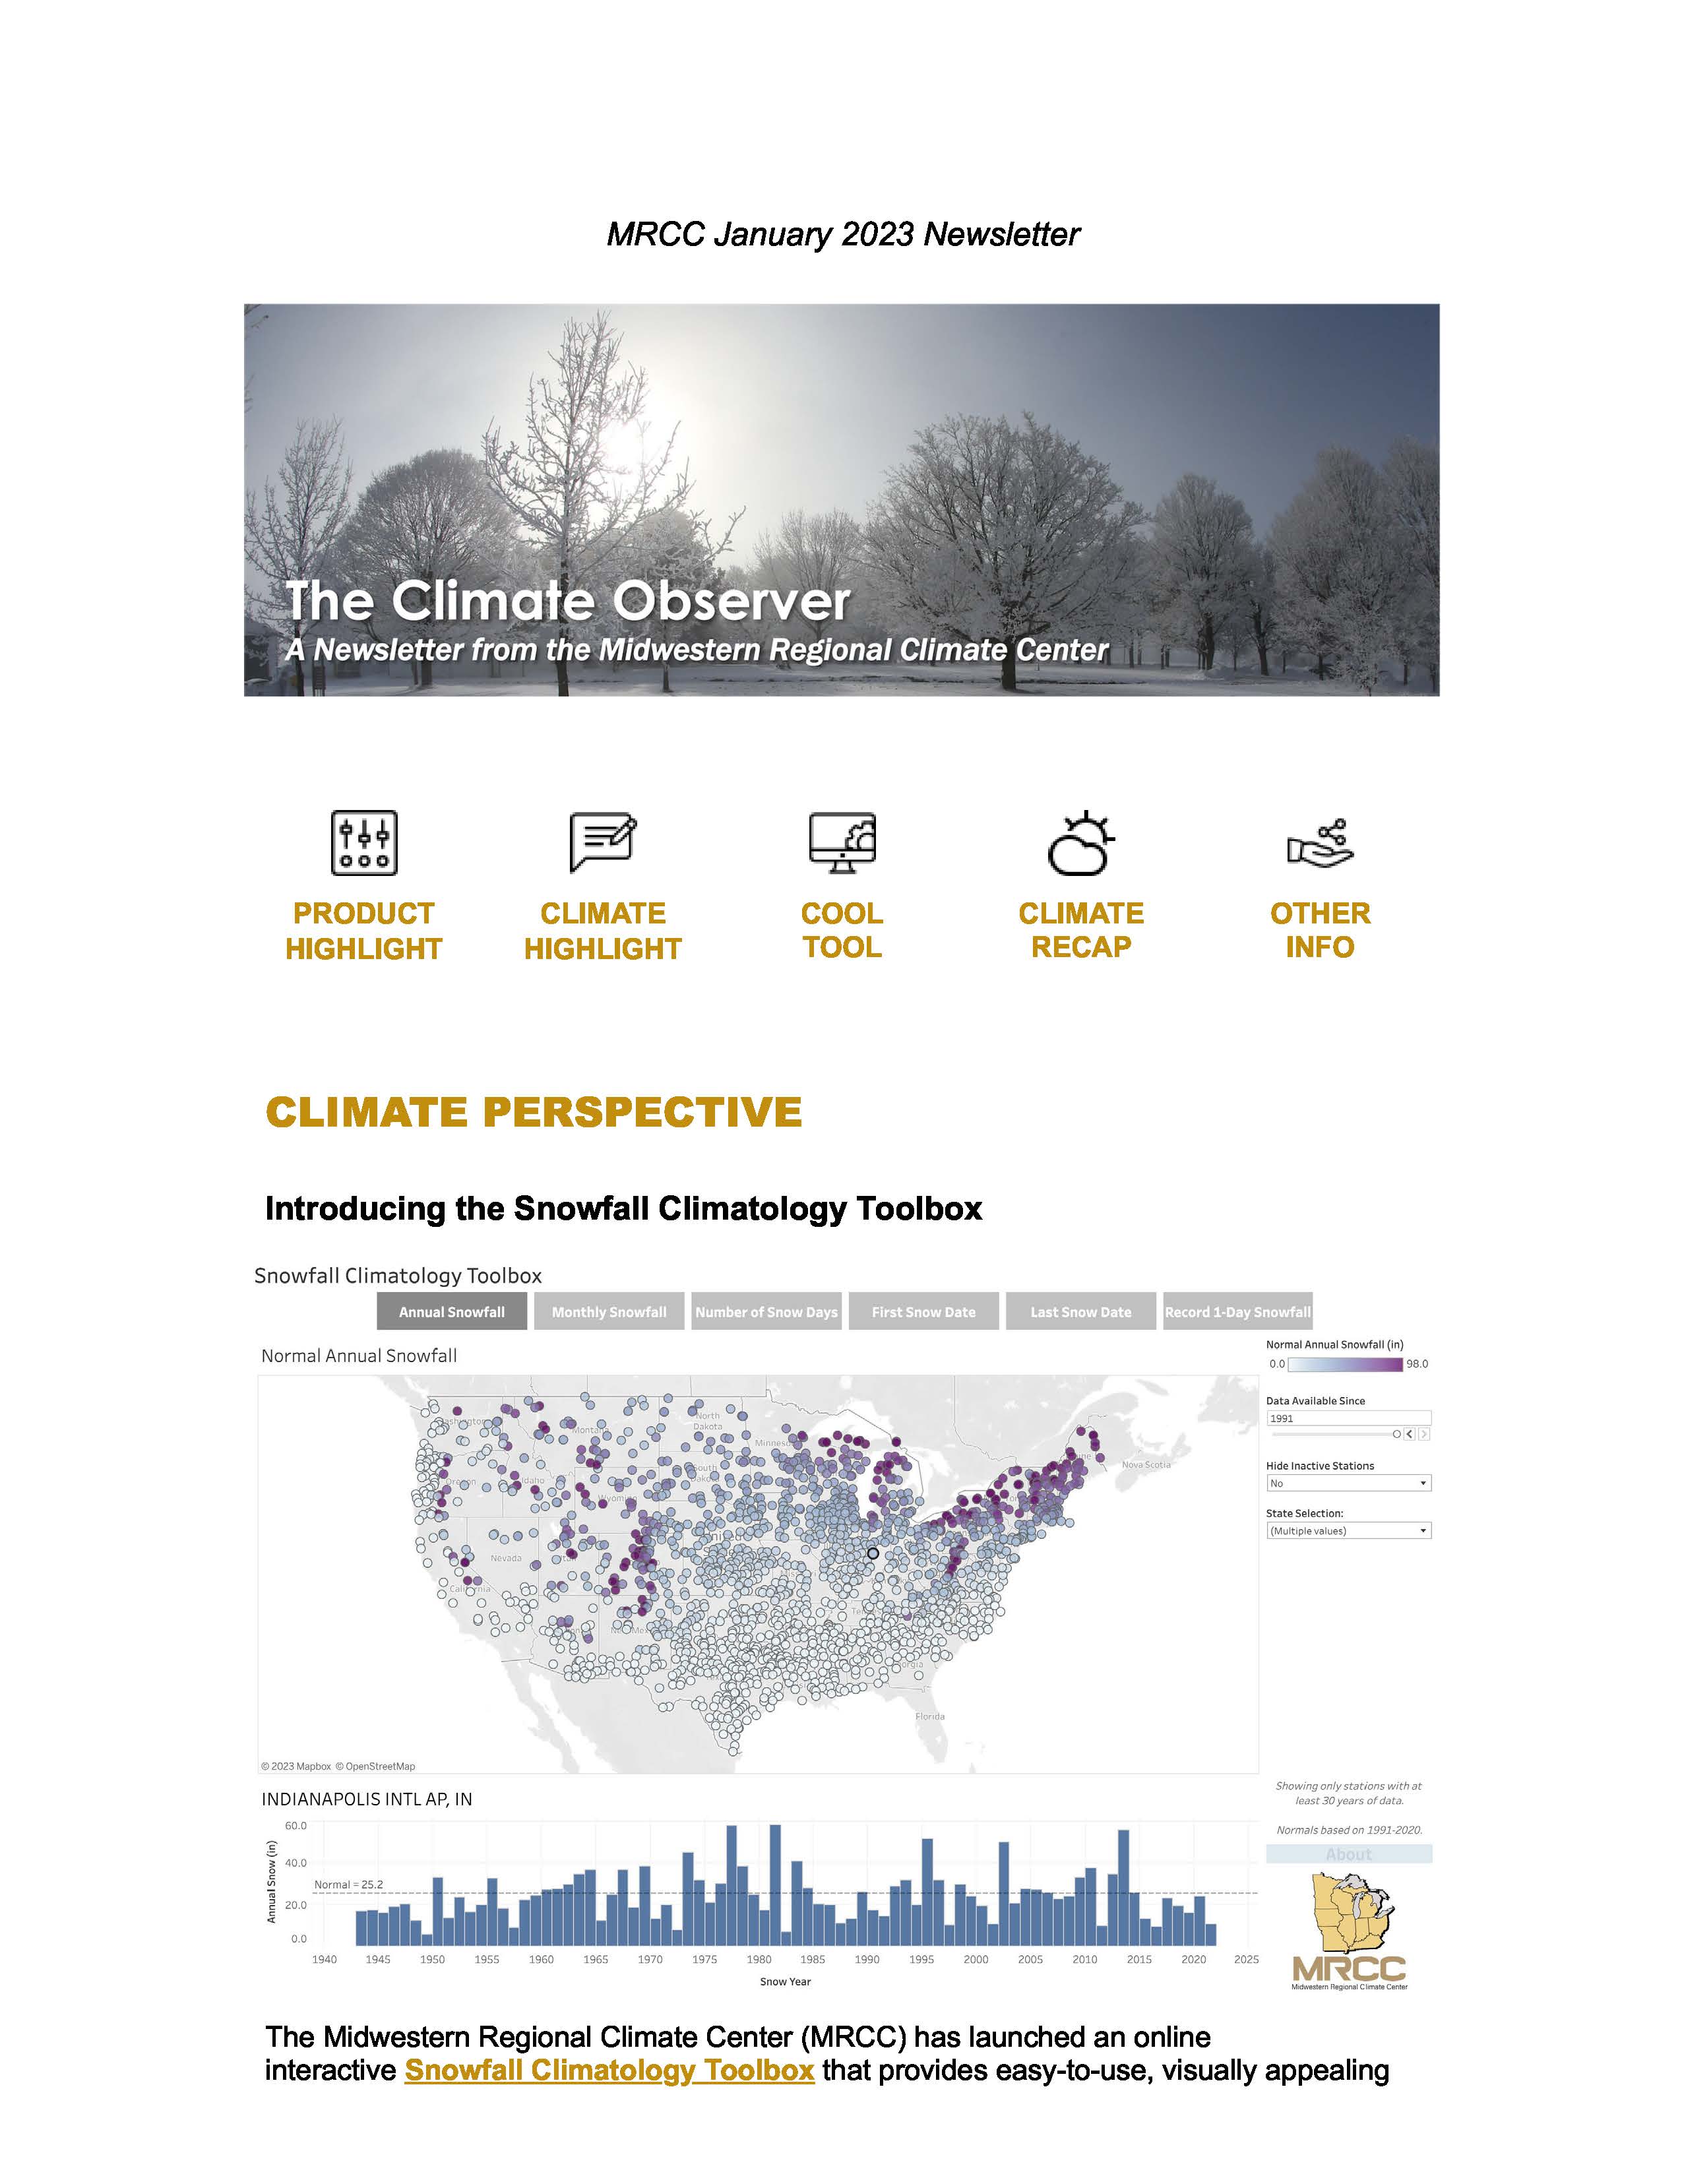 January 2023 "The Climate Observer"